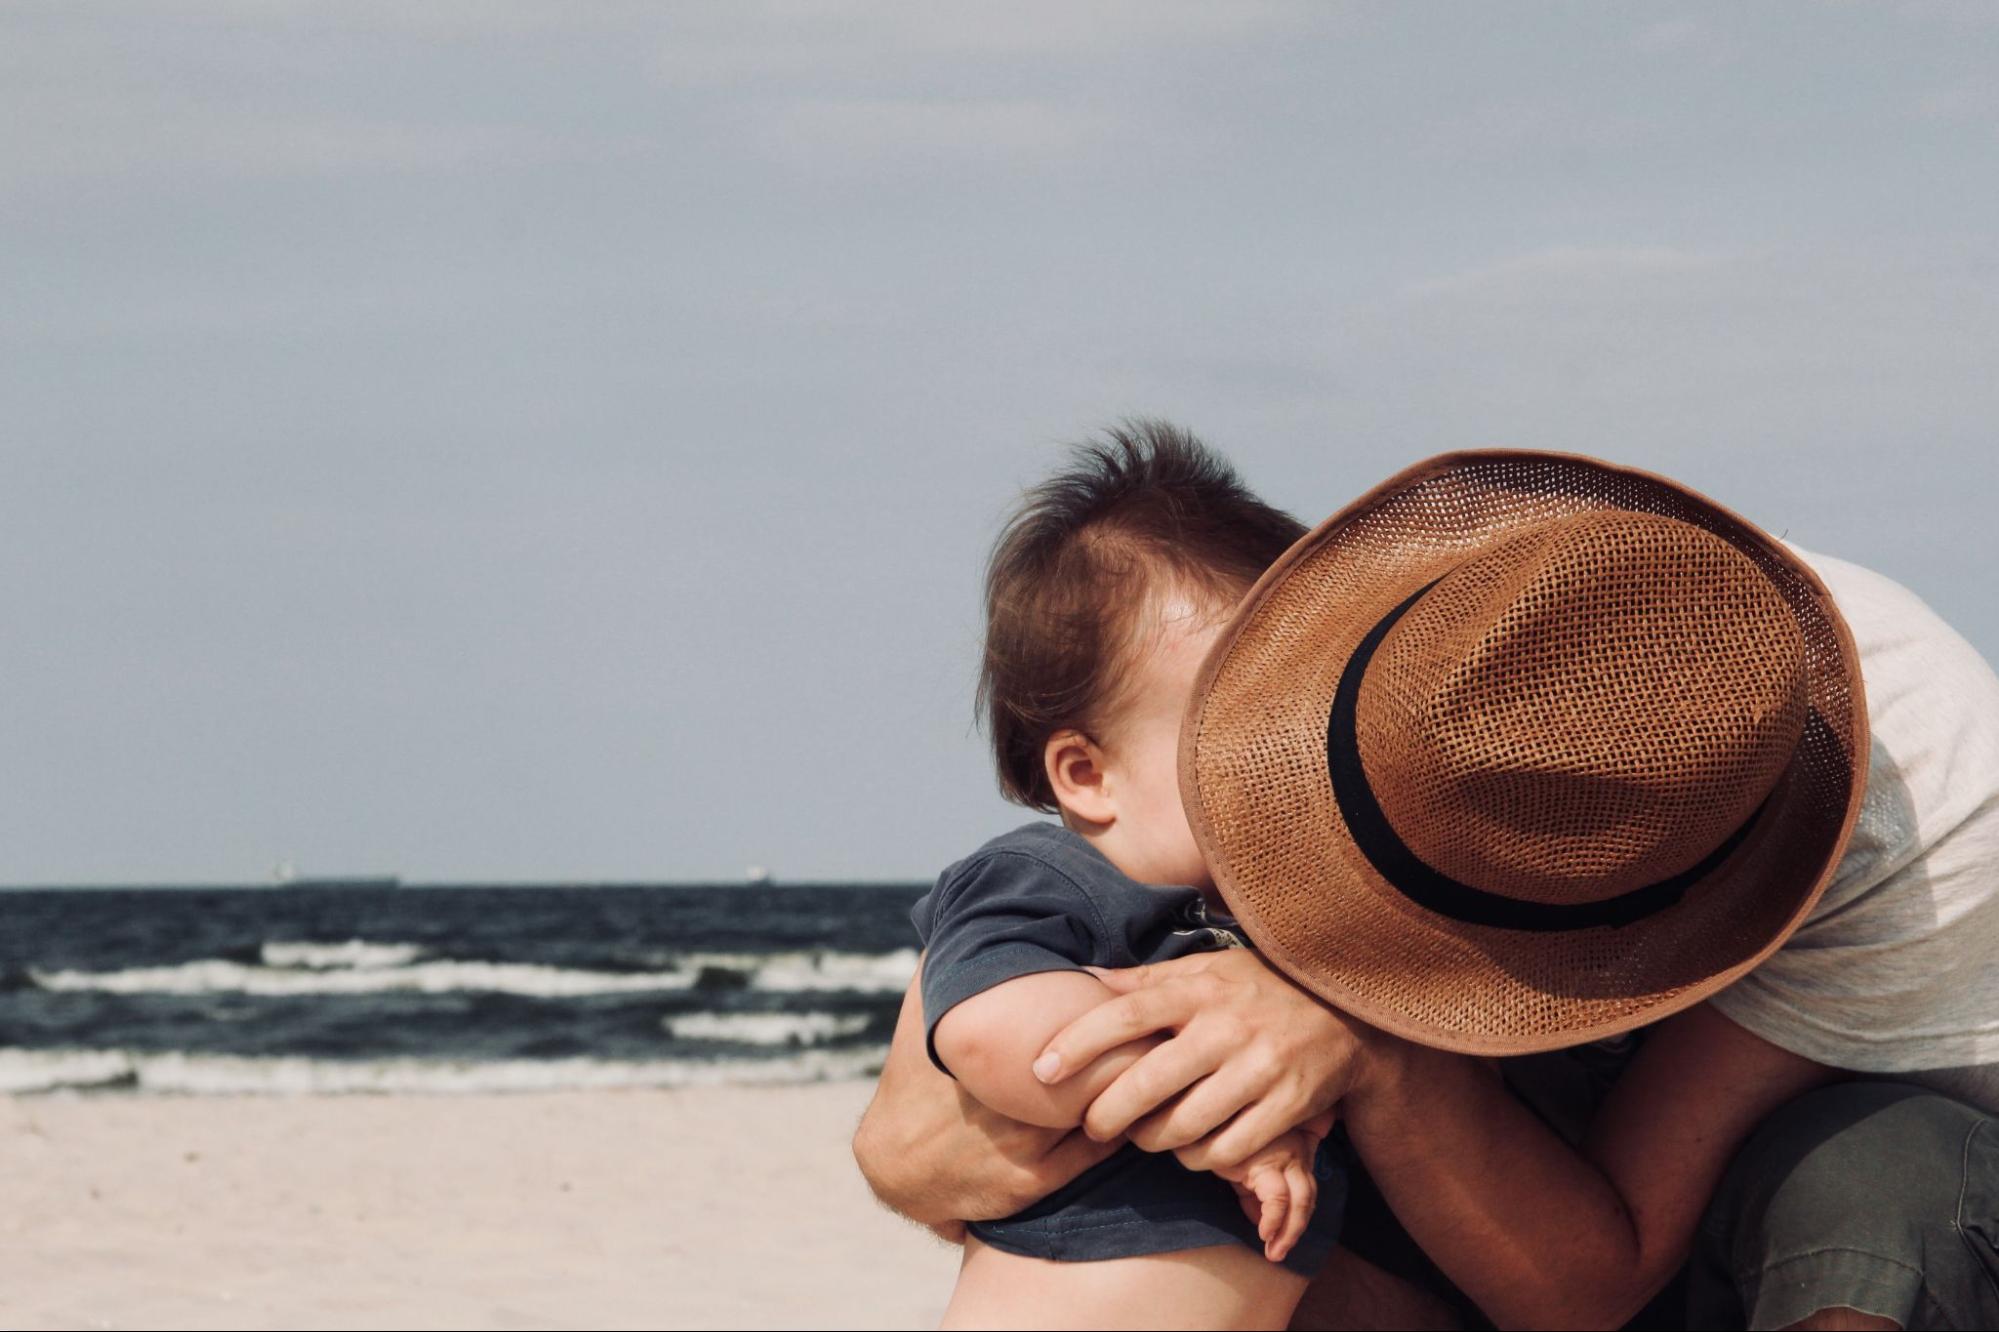 This is an image of a father and son embracing on a beach.